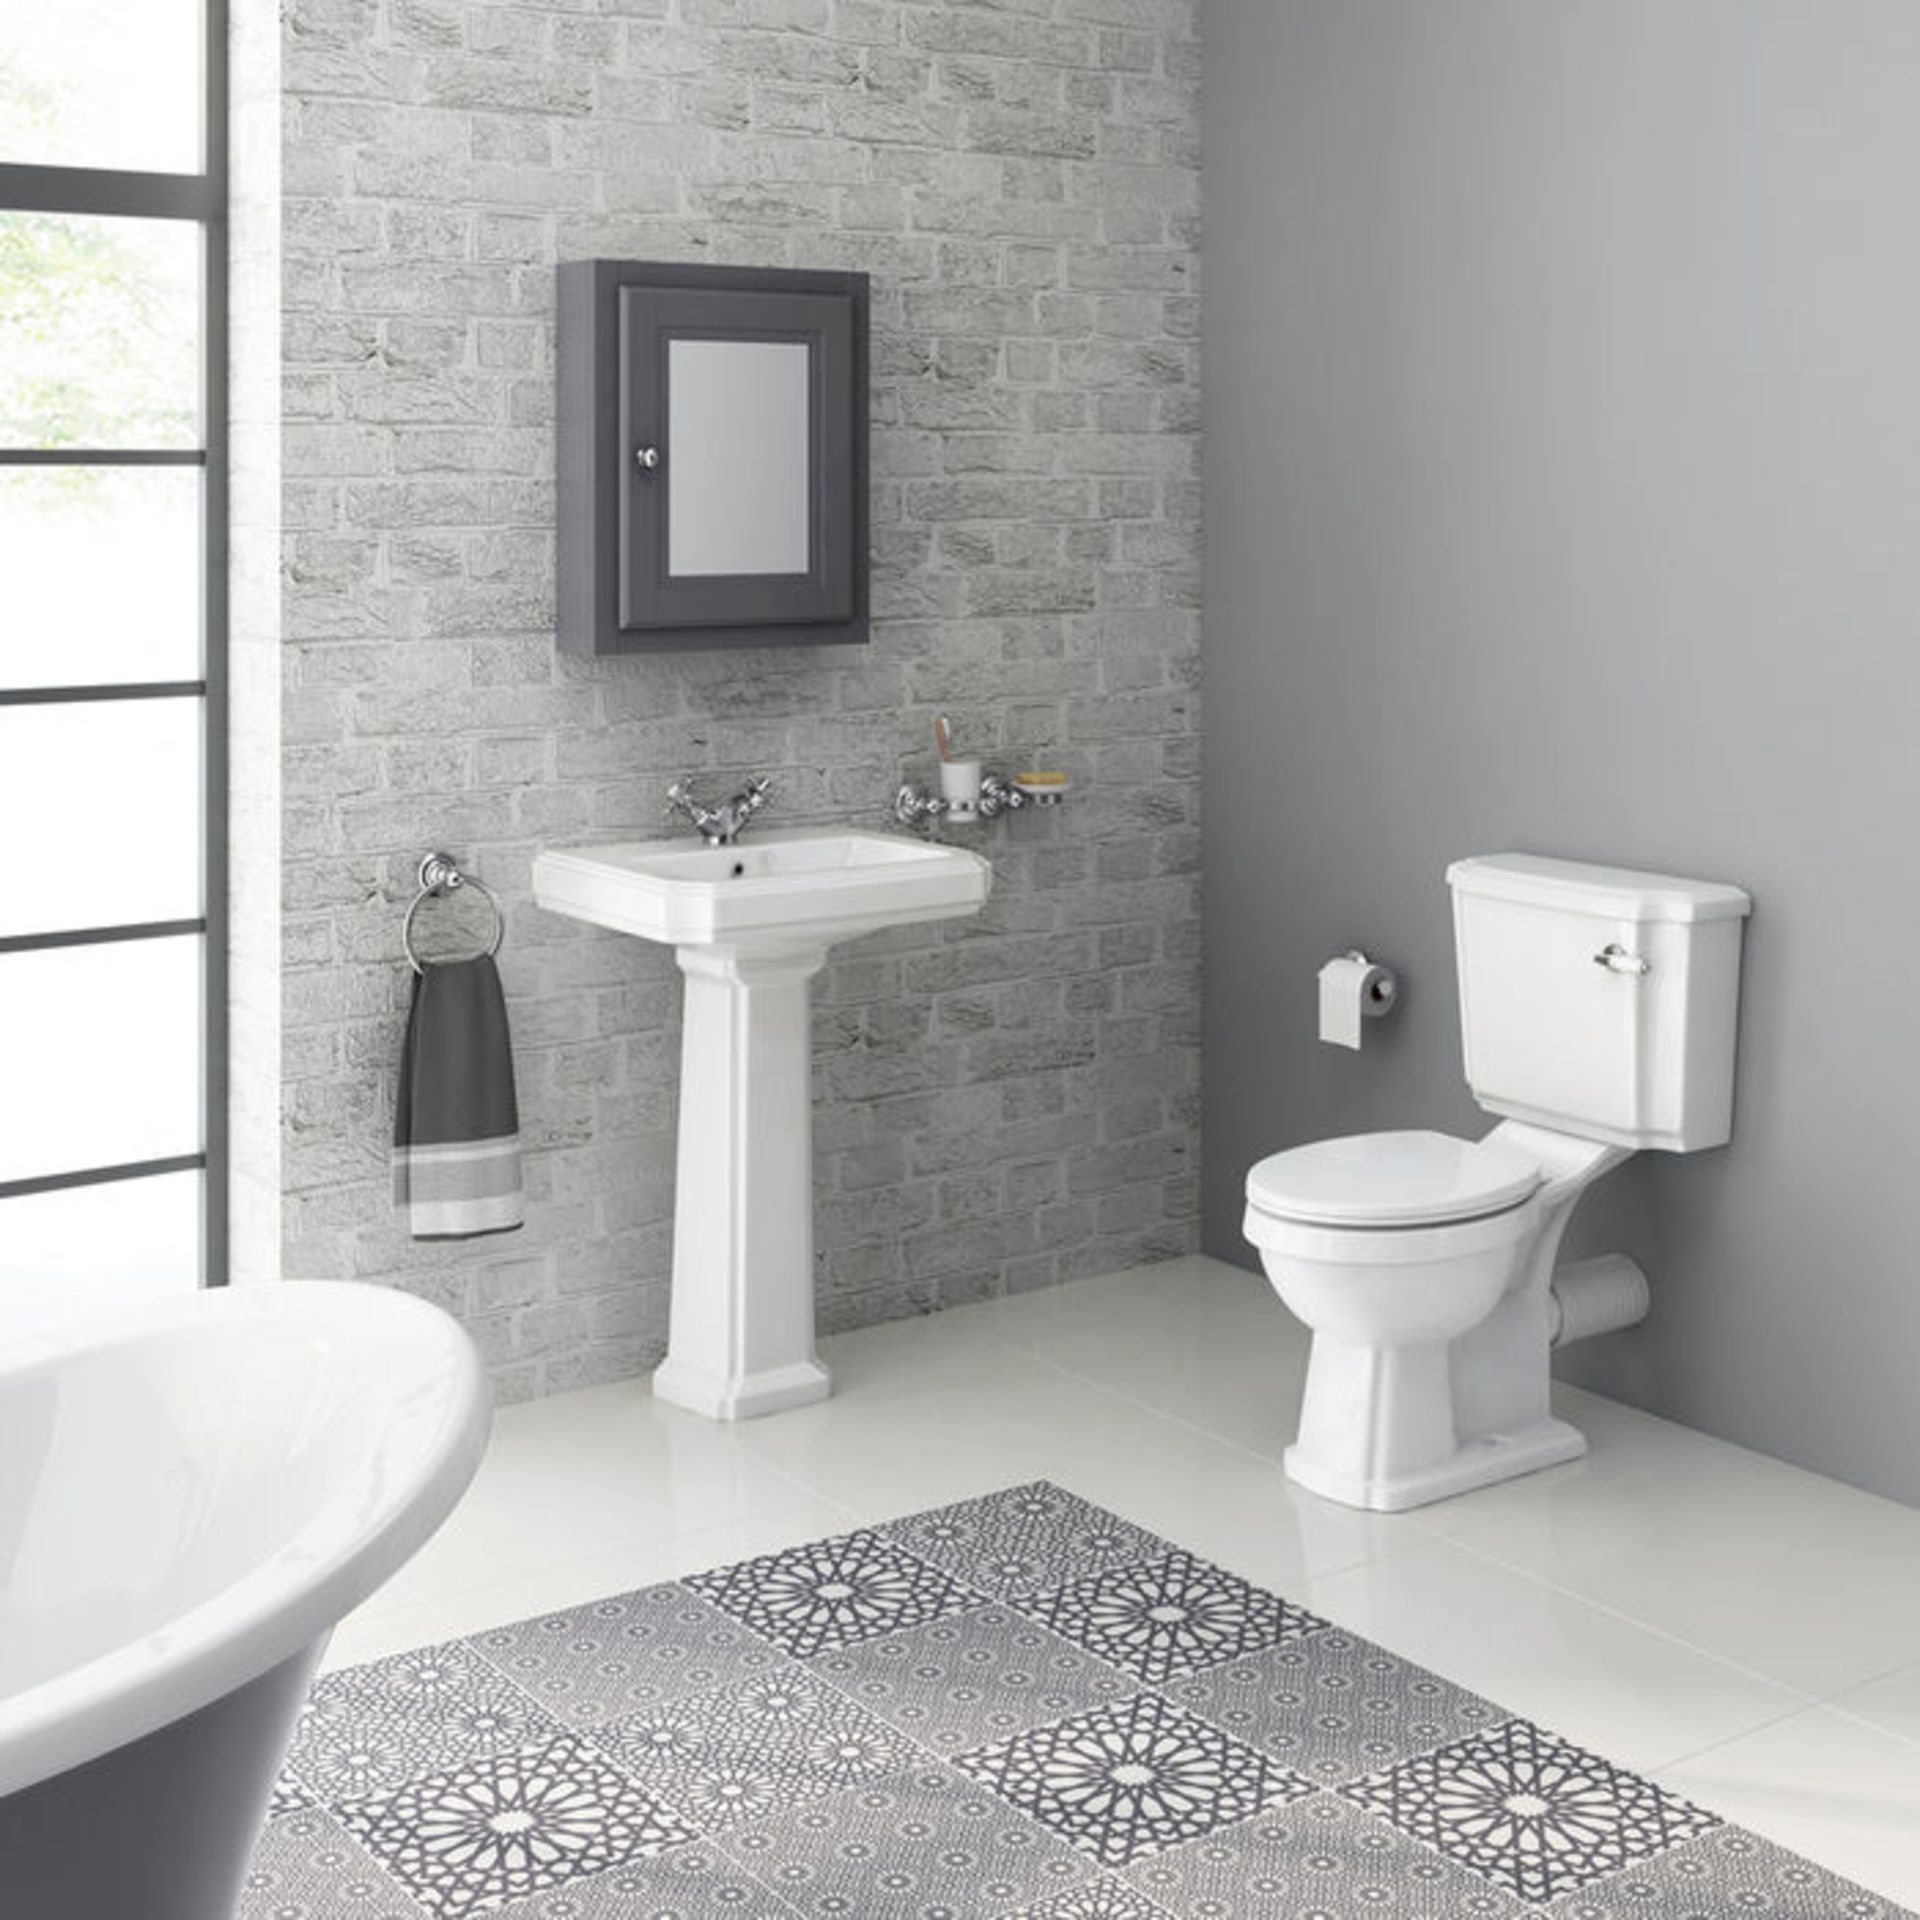 (EY226) Cambridge Traditional Close Coupled Toilet & Cistern - White Seat Traditional features add - Image 4 of 4